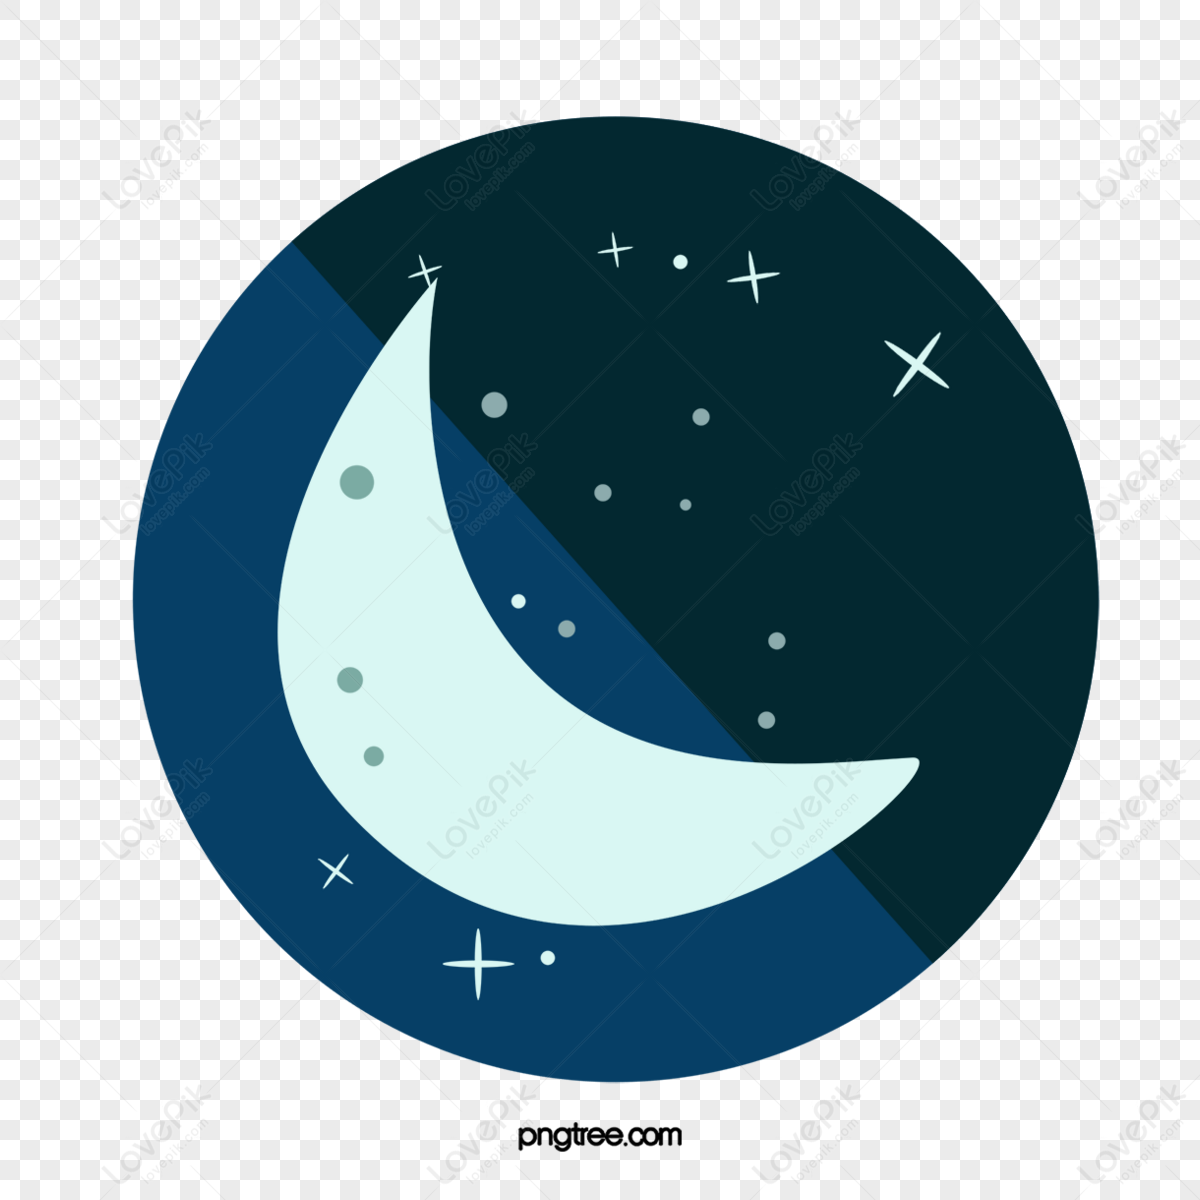 Moon Icon Vector Art, Icons, and Graphics for Free Download